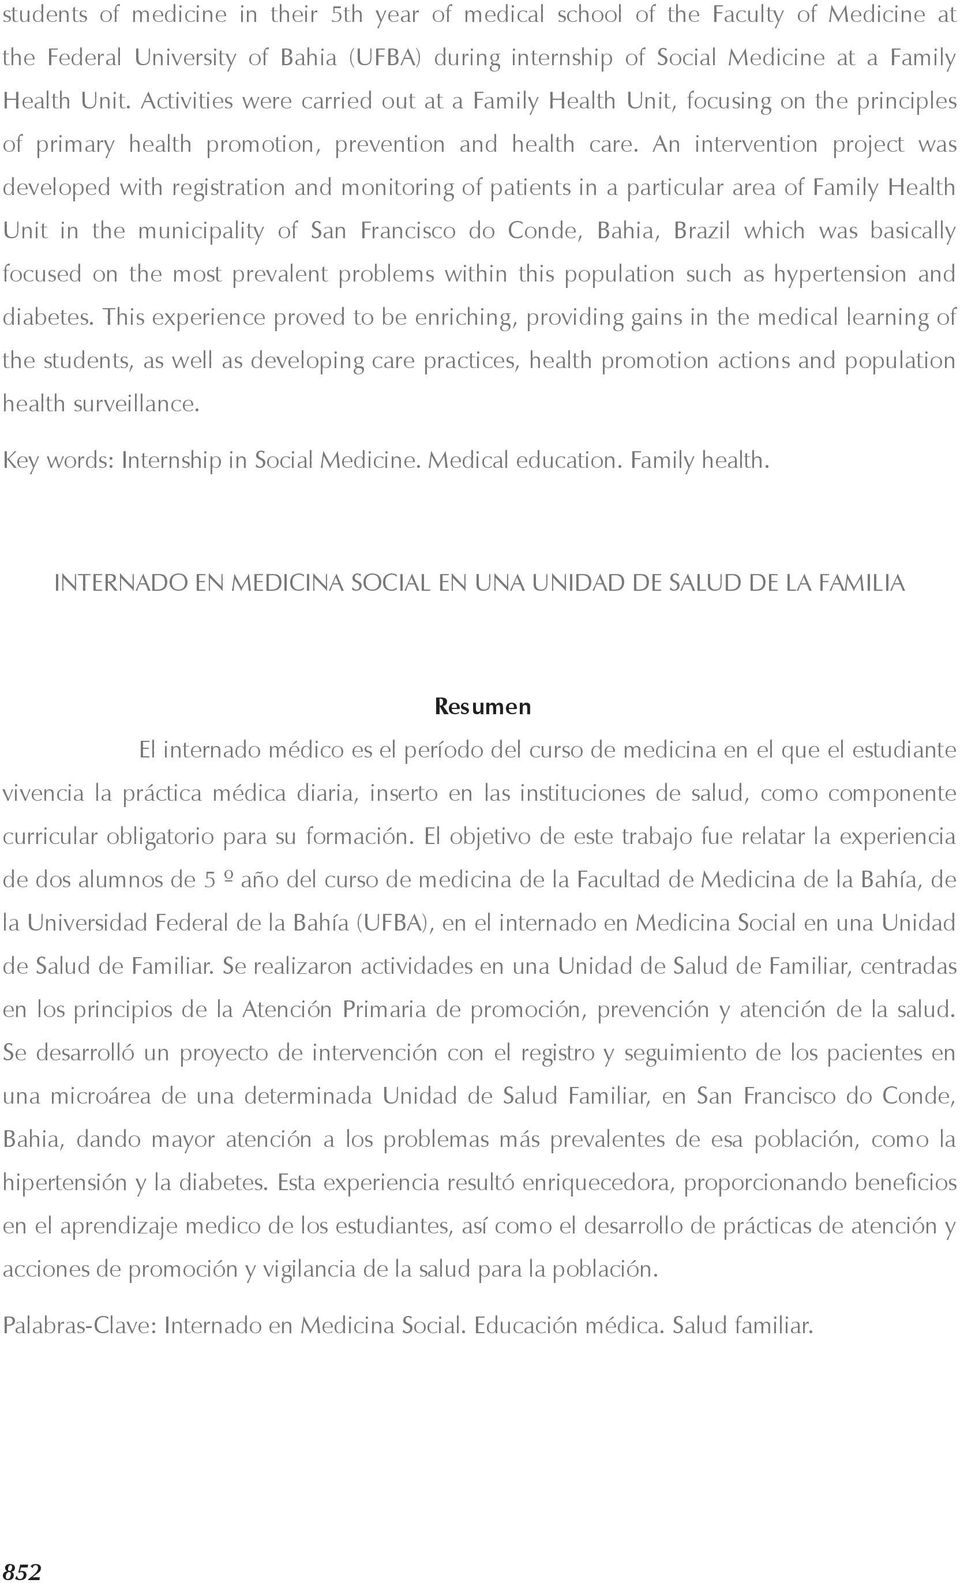 An intervention project was developed with registration and monitoring of patients in a particular area of Family Health Unit in the municipality of San Francisco do Conde, Bahia, Brazil which was